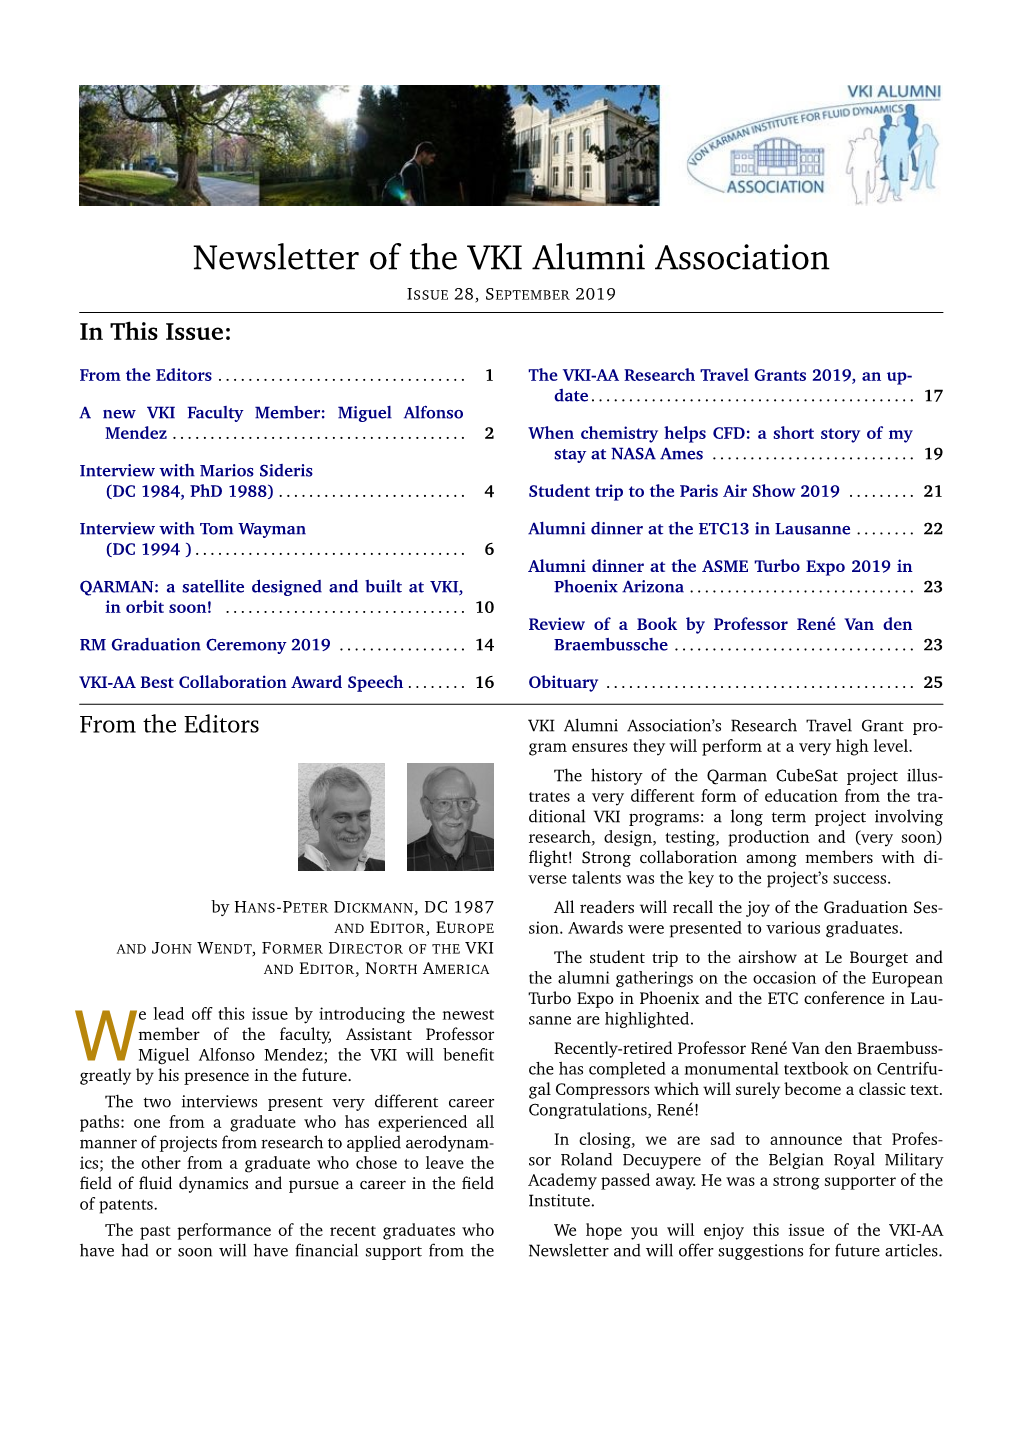 Newsletter of the VKI Alumni Association ISSUE 28, SEPTEMBER 2019 in This Issue